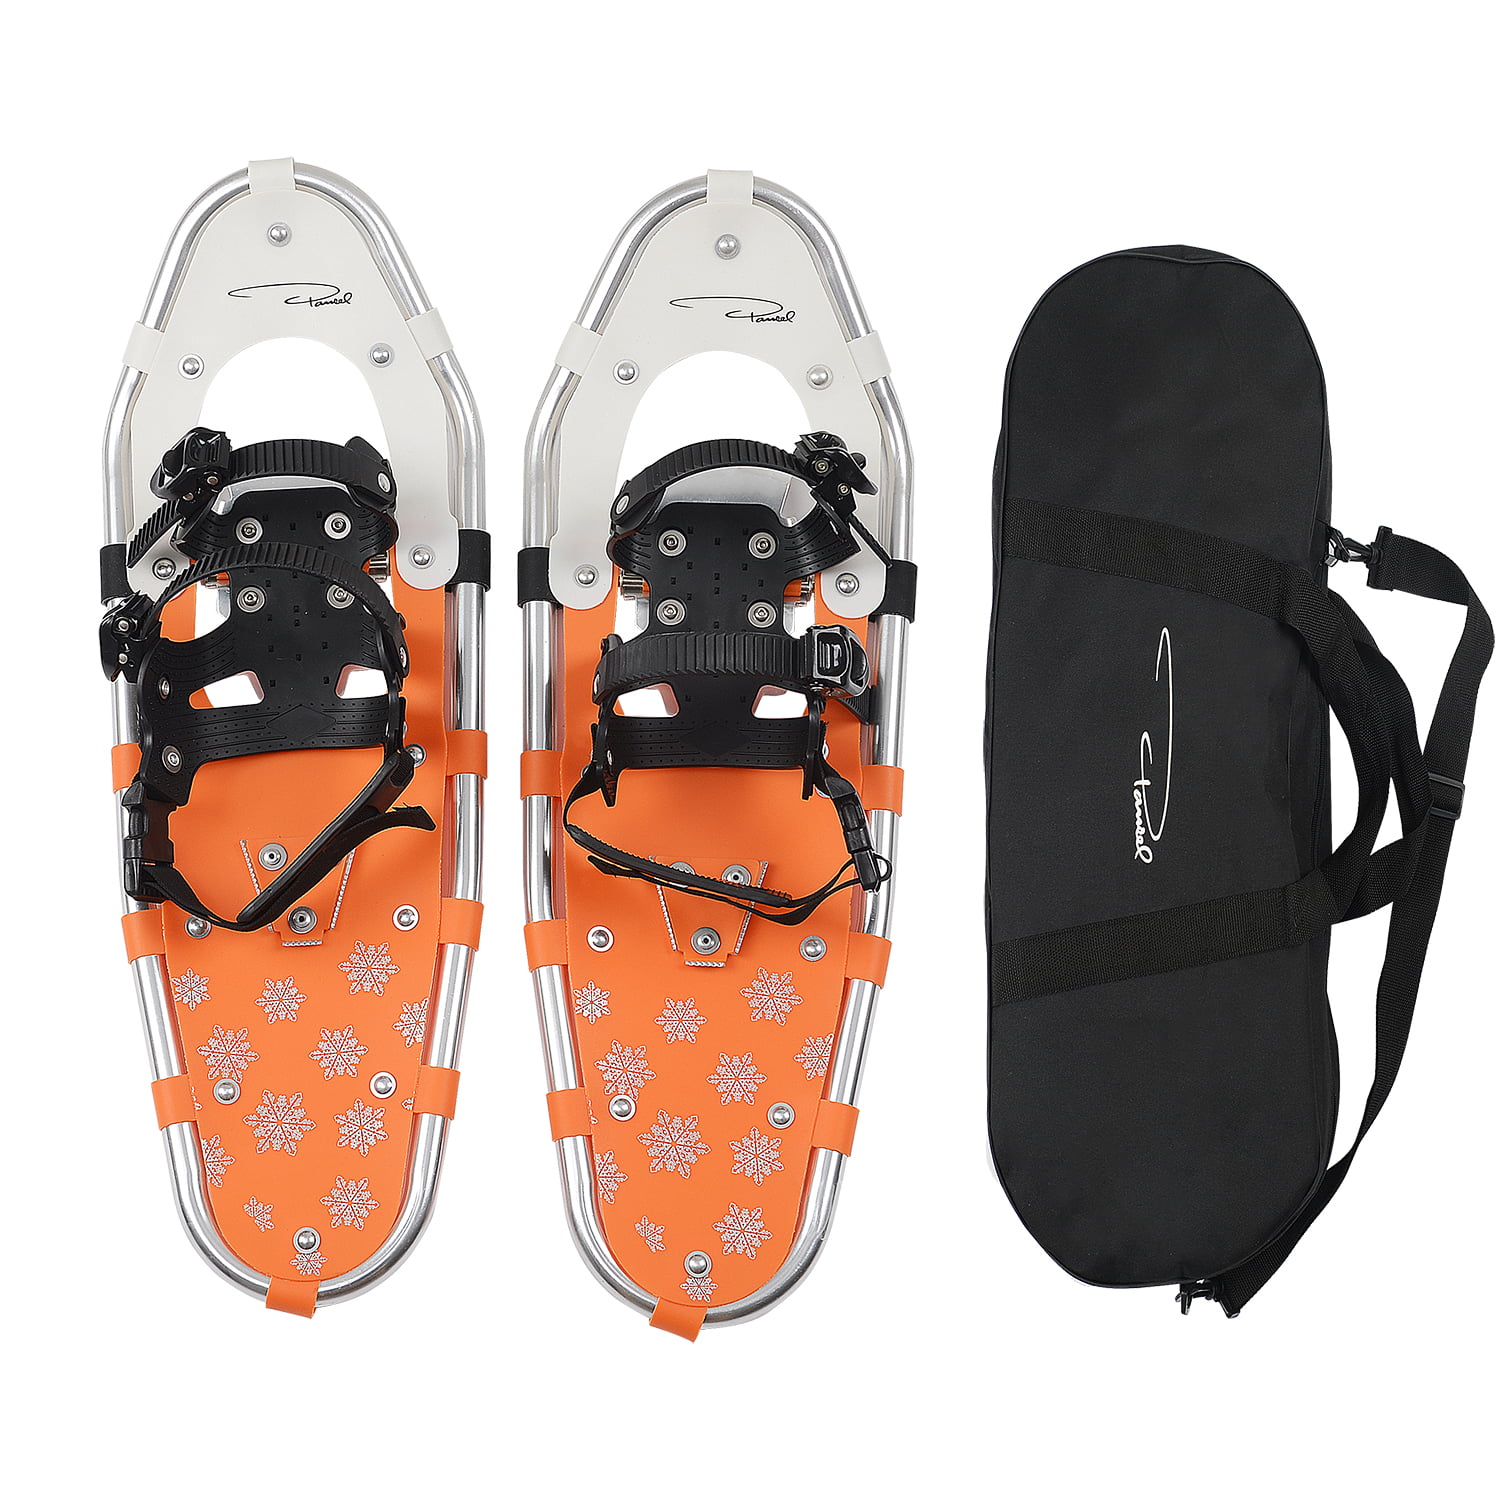 14//21// 25//27// 30 Snowshoes for Men Women Youth Kids Lightweight Aluminum Alloy All Terrain Snow Shoes with Adjustable Ratchet Bindings with Carrying Tote Bag